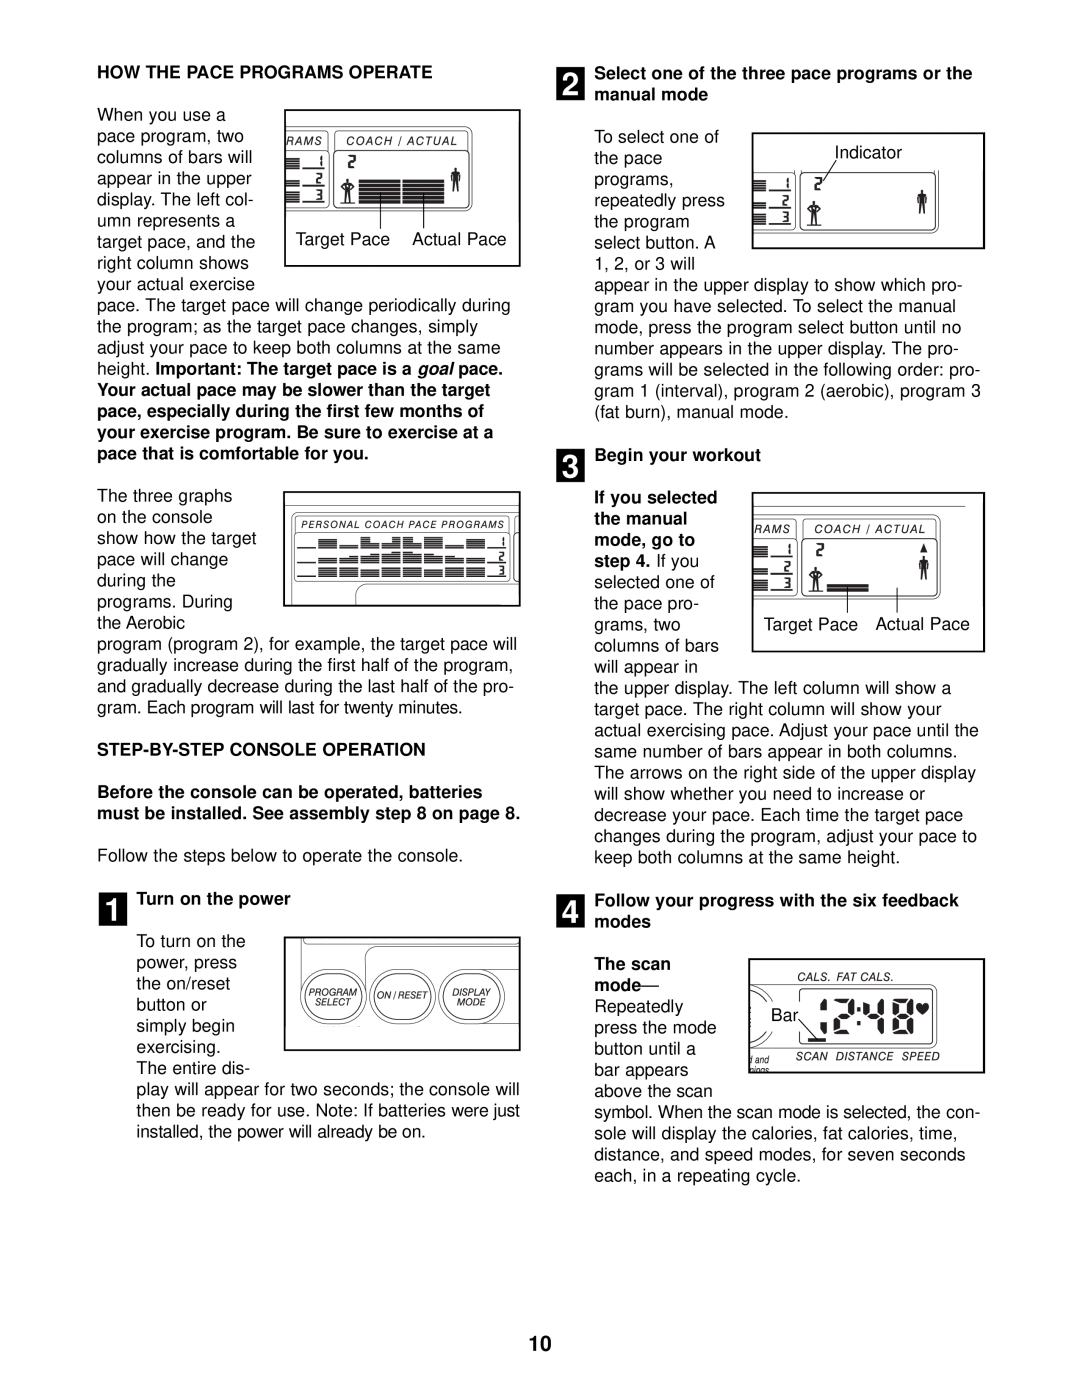 ProForm PFEL03010 How The Pace Programs Operate, Step-By-Step Console Operation, Turn on the power, manual mode, If you 